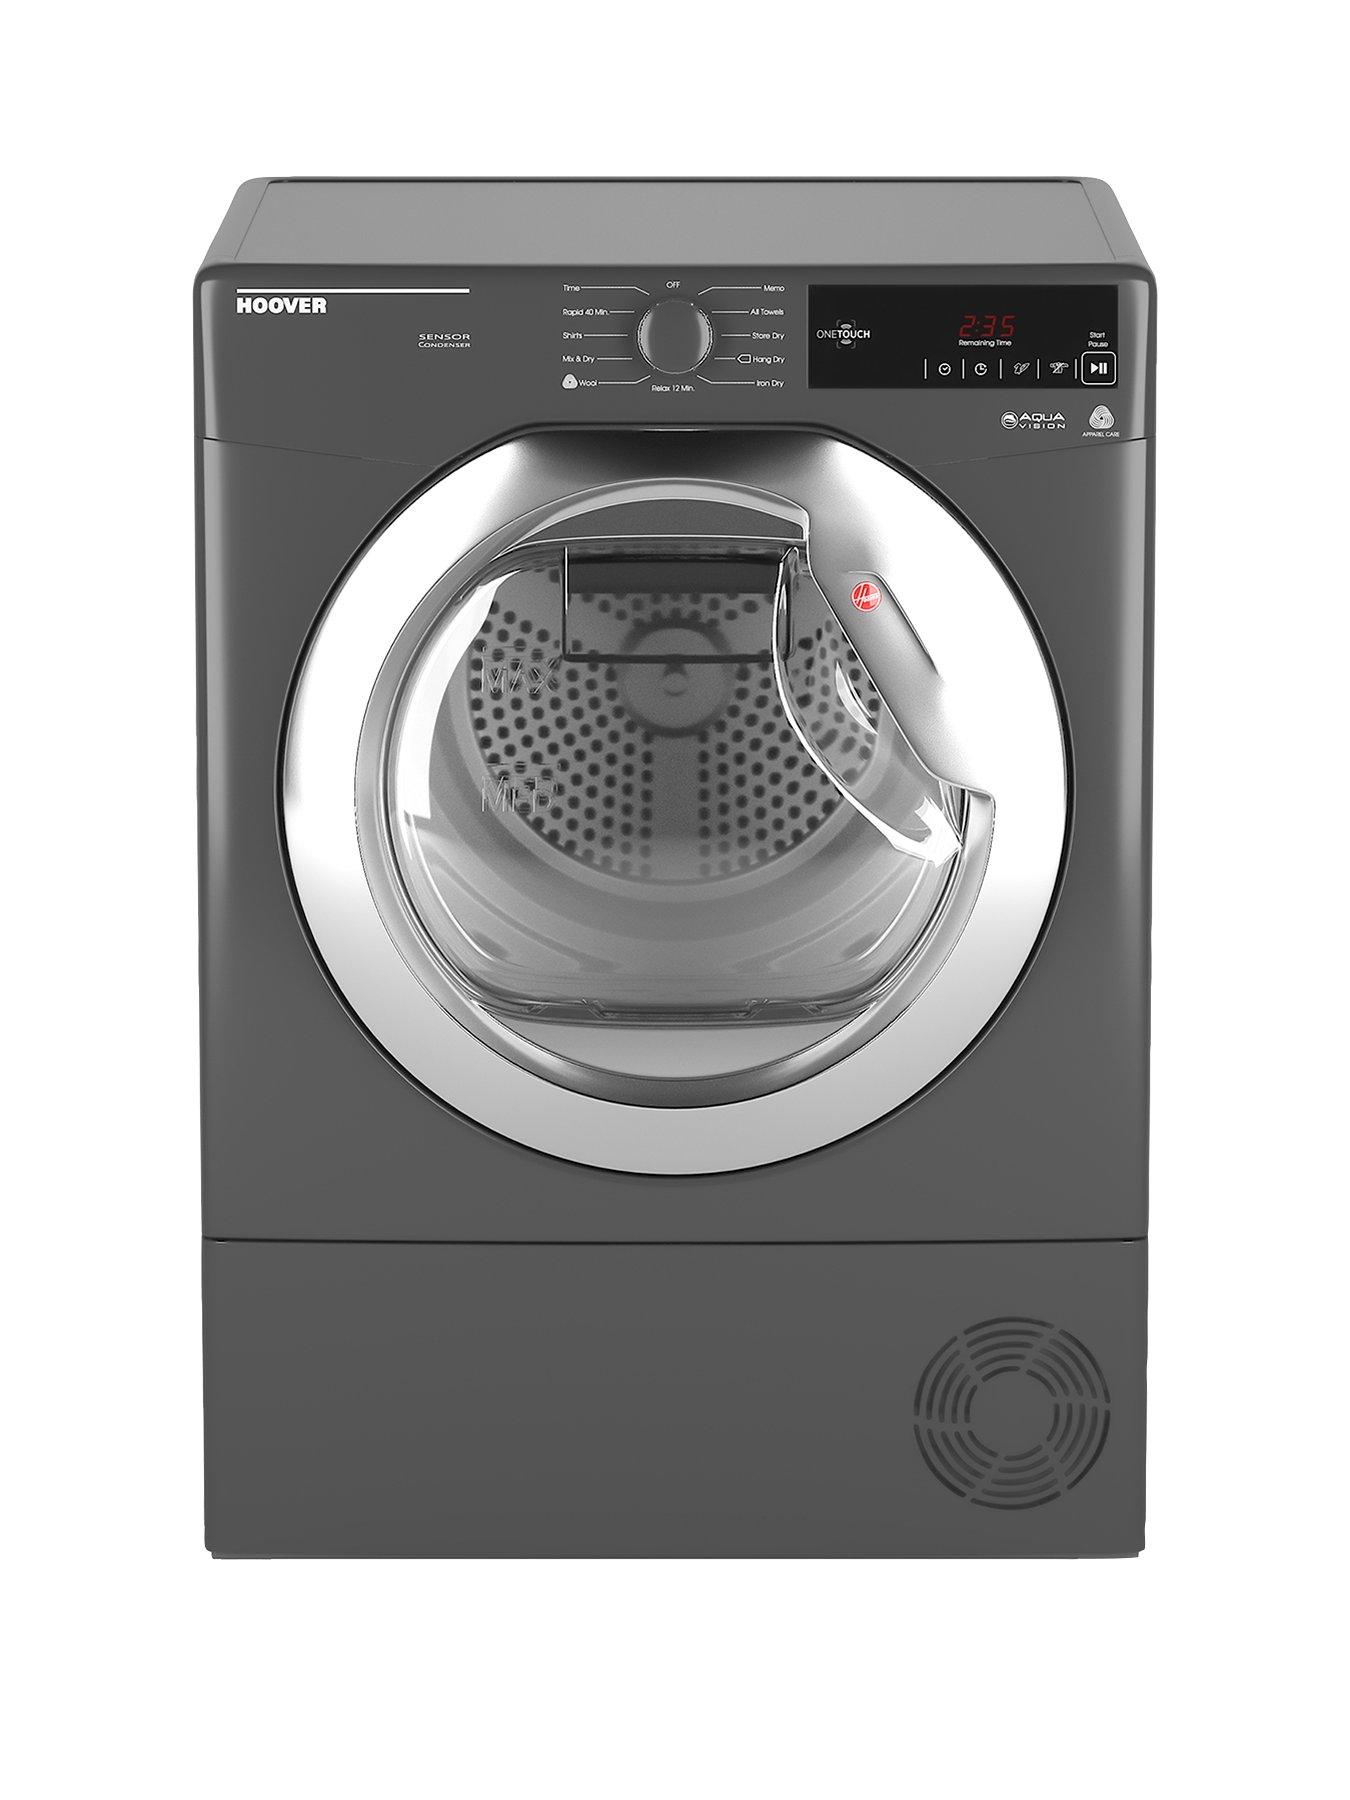 Hoover Dynamic Next Dxc9Tcer 9Kg Load, Aquavision Condenser Tumble Dryer With One Touch – Graphite/Chrome